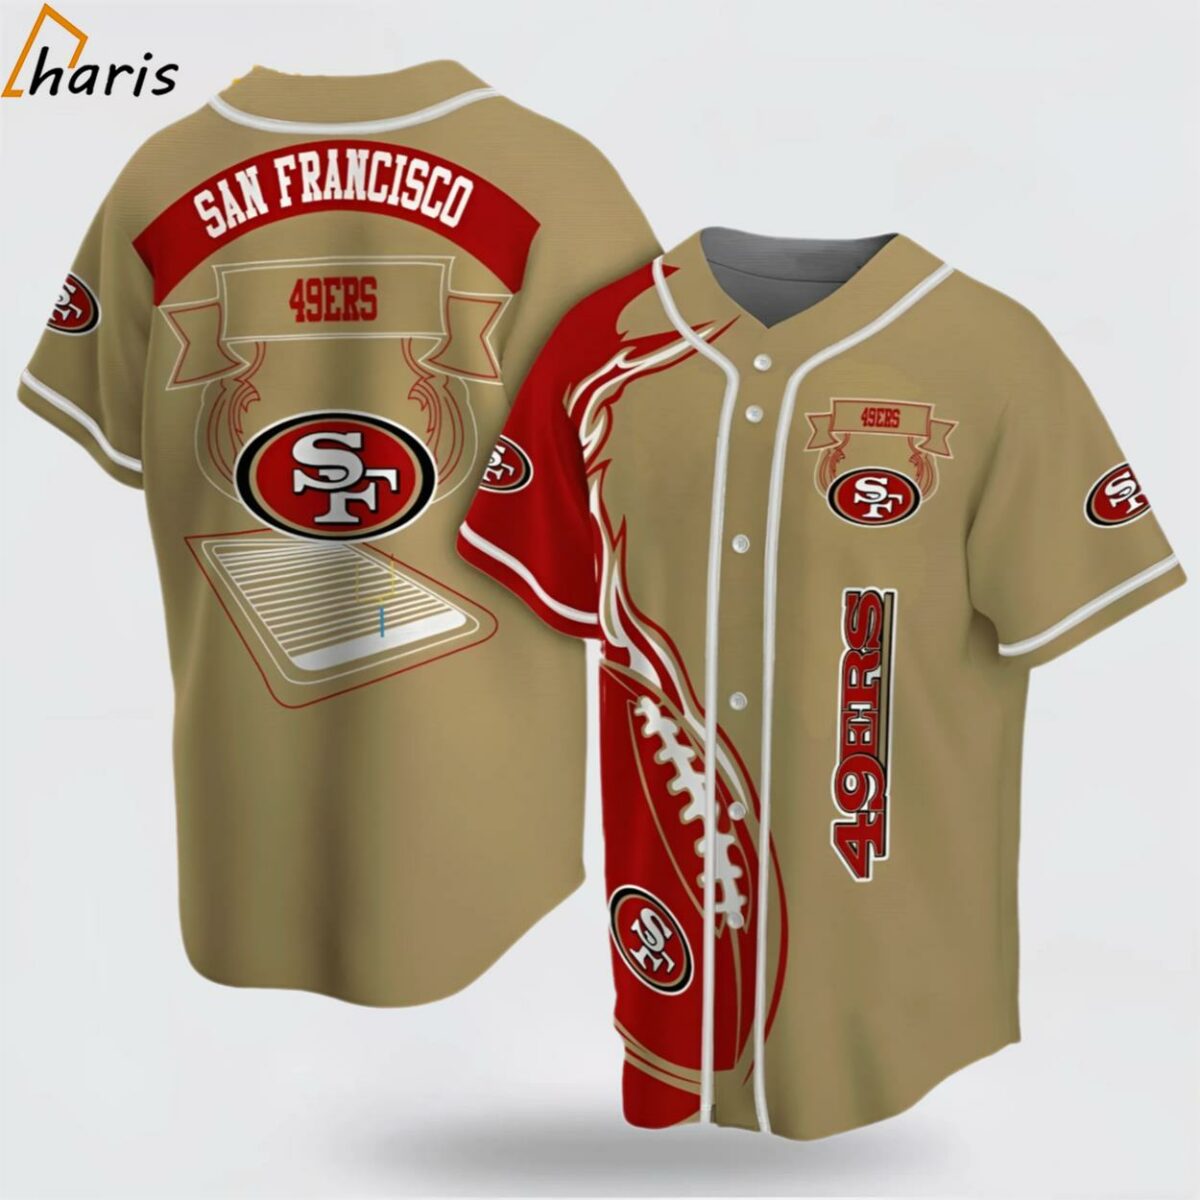 NFL San Francisco 49ers ymbol Fire Rugby Ball Red Brown Baseball Jersey 1 jersey